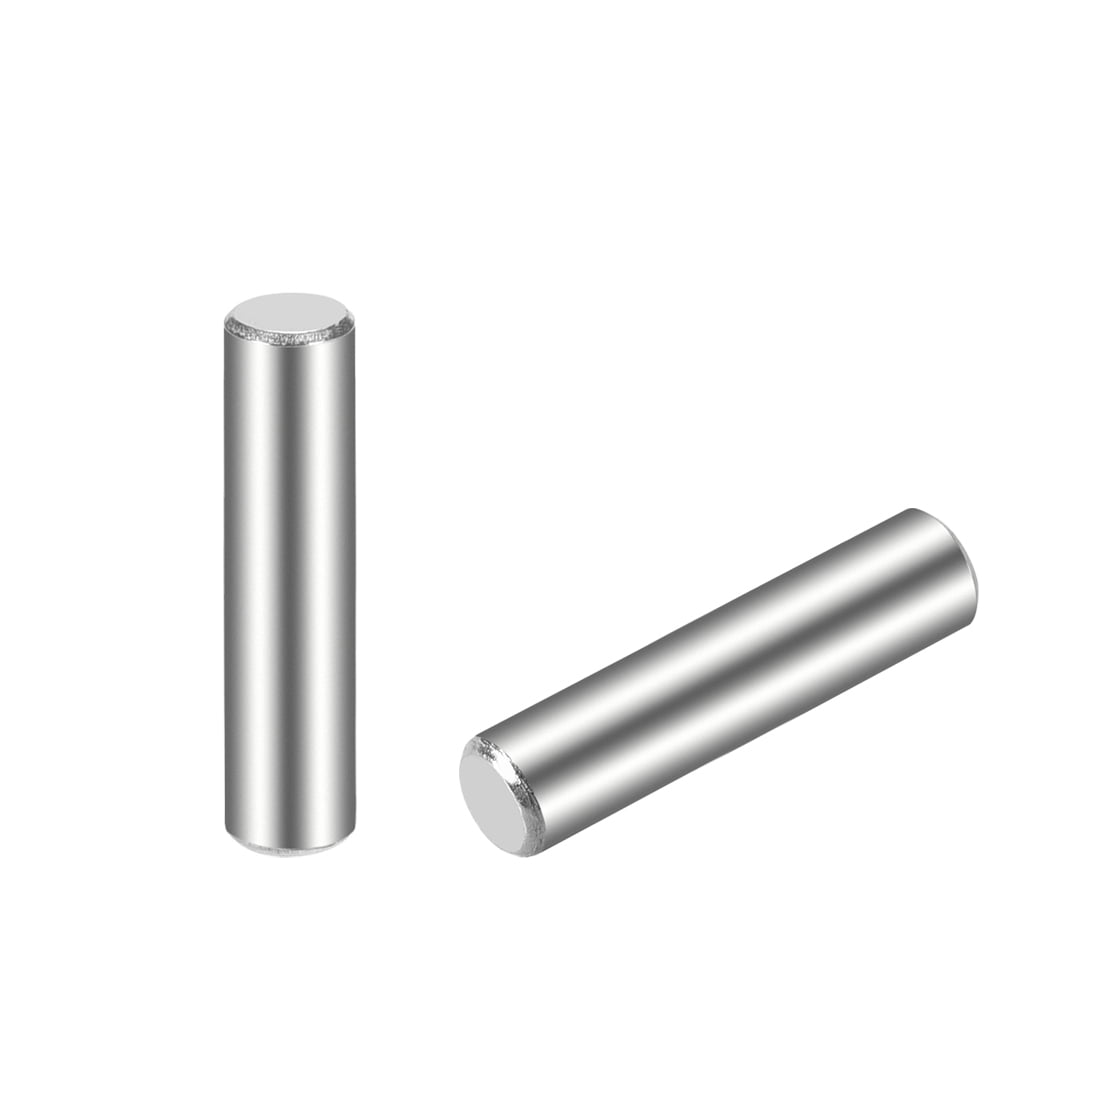 Details about   12mm X 45mm Dowel Pin 304 Stainless Steel Cylindrical Shelf Support Pin 